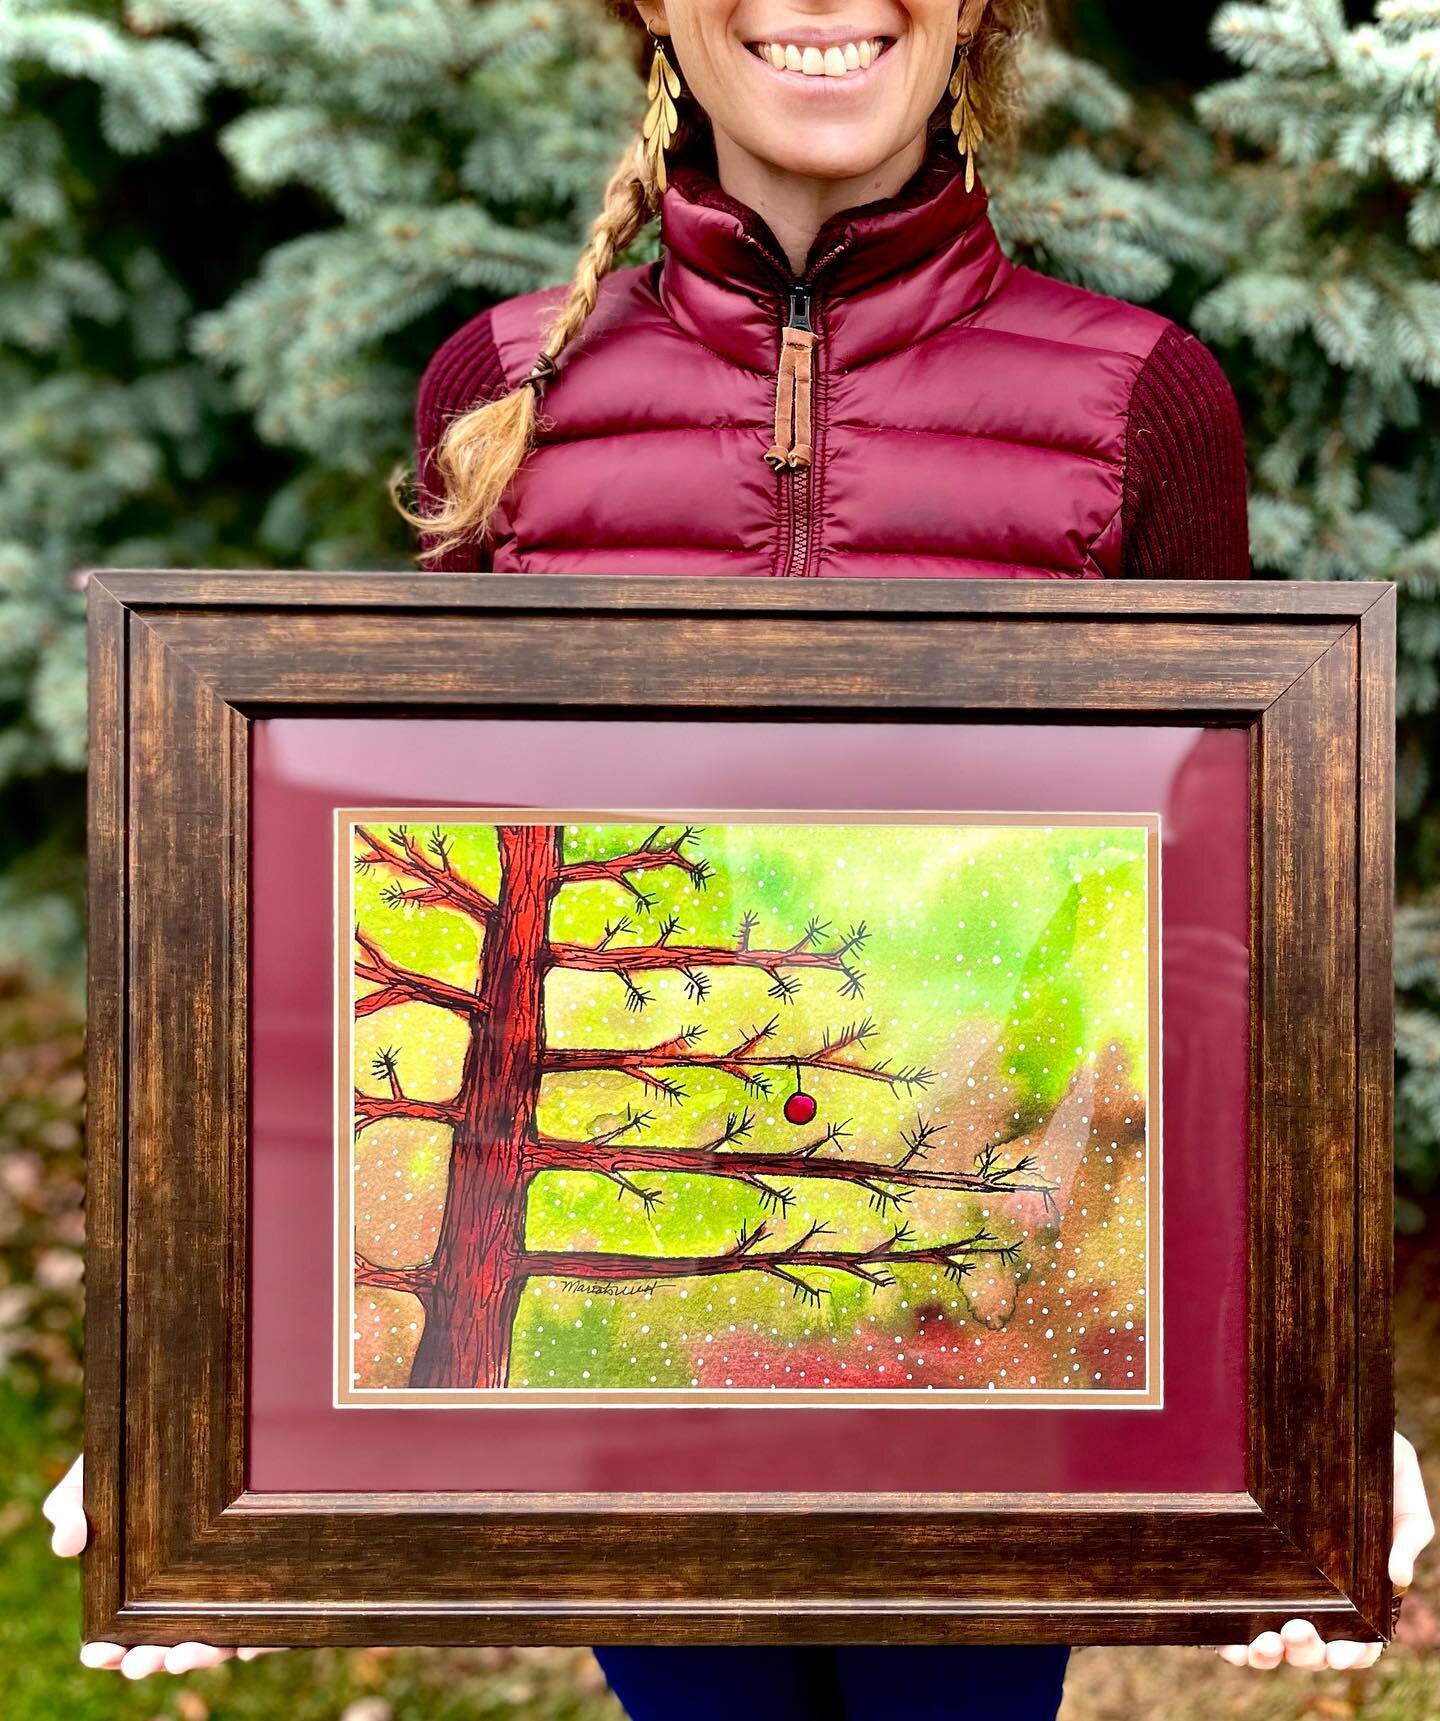 ✨Fully framed prints are available!

Here is an absolutely beautiful example of a print I just had framed through my online print shop for our personal Christmas decor. 

❤️I love it!❤️

Just visit my website, click on any tote or print, and it will 